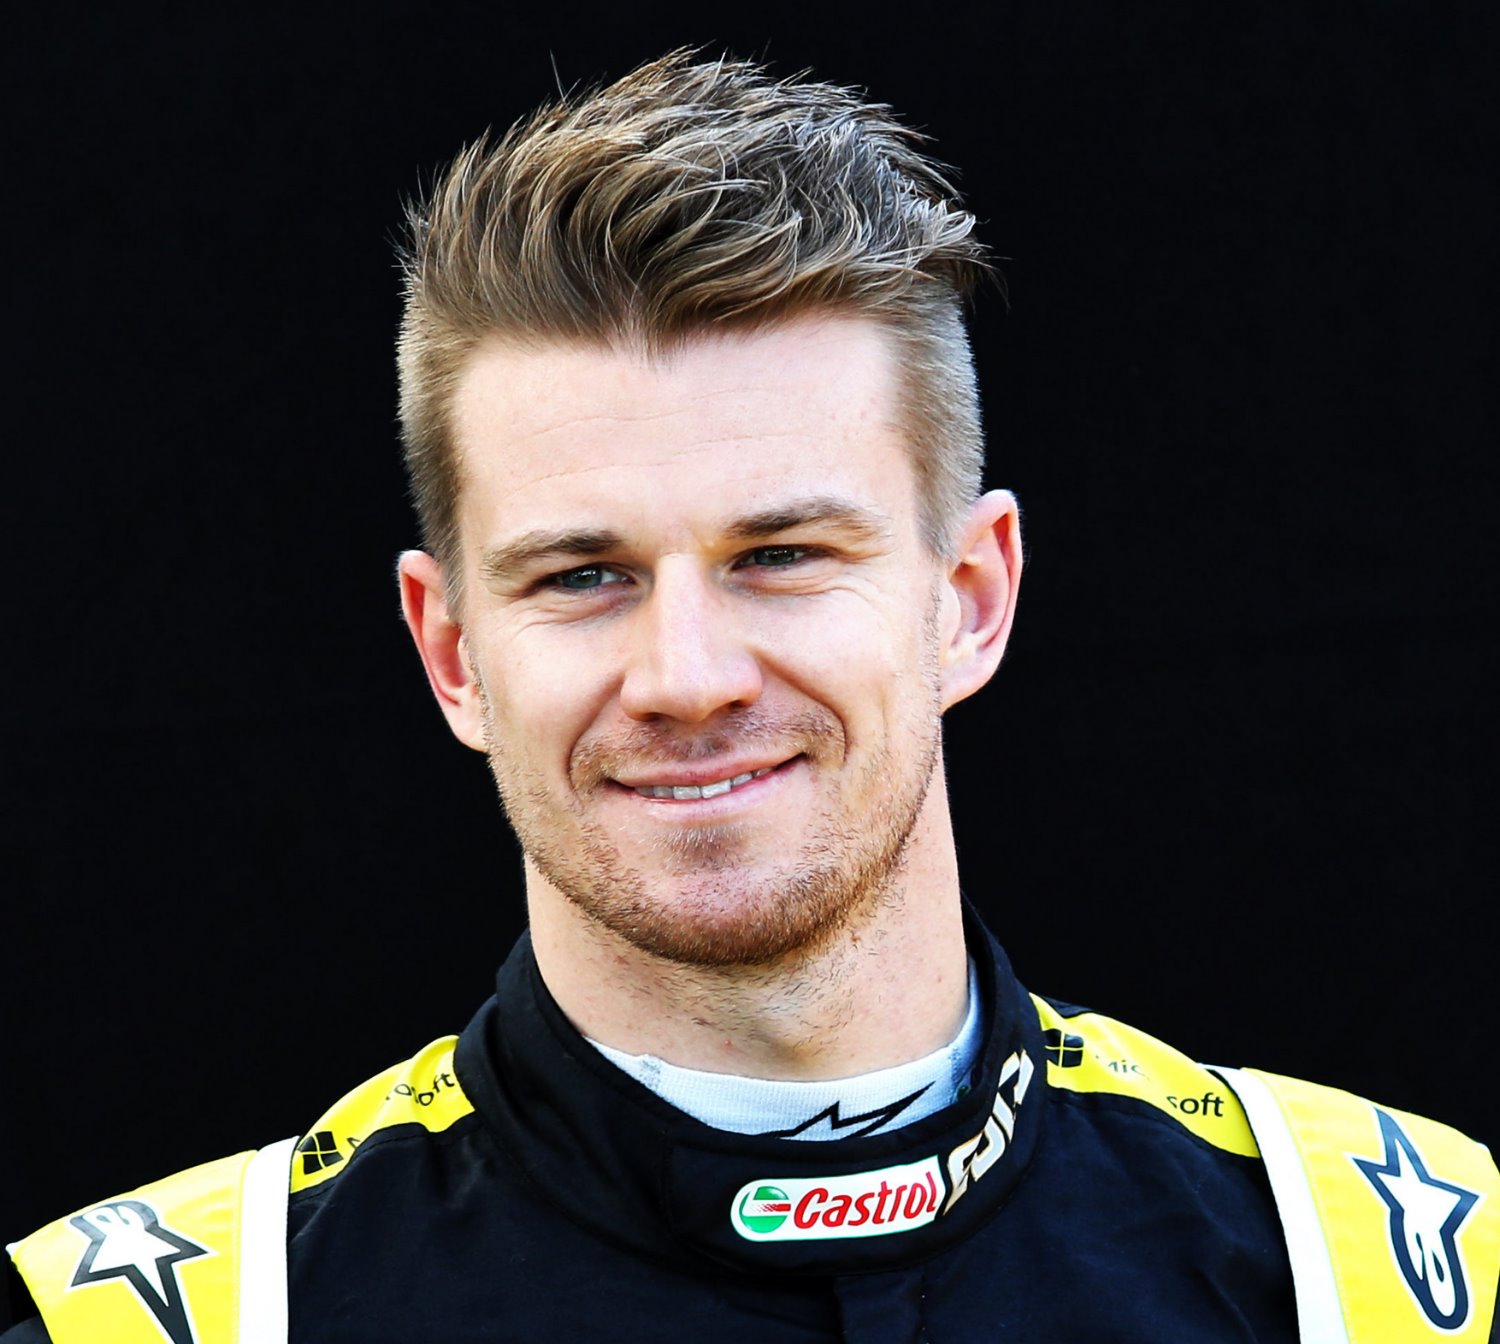 AR1.com rumored Hulkenberg to Alfa Romeo way before all other news publications